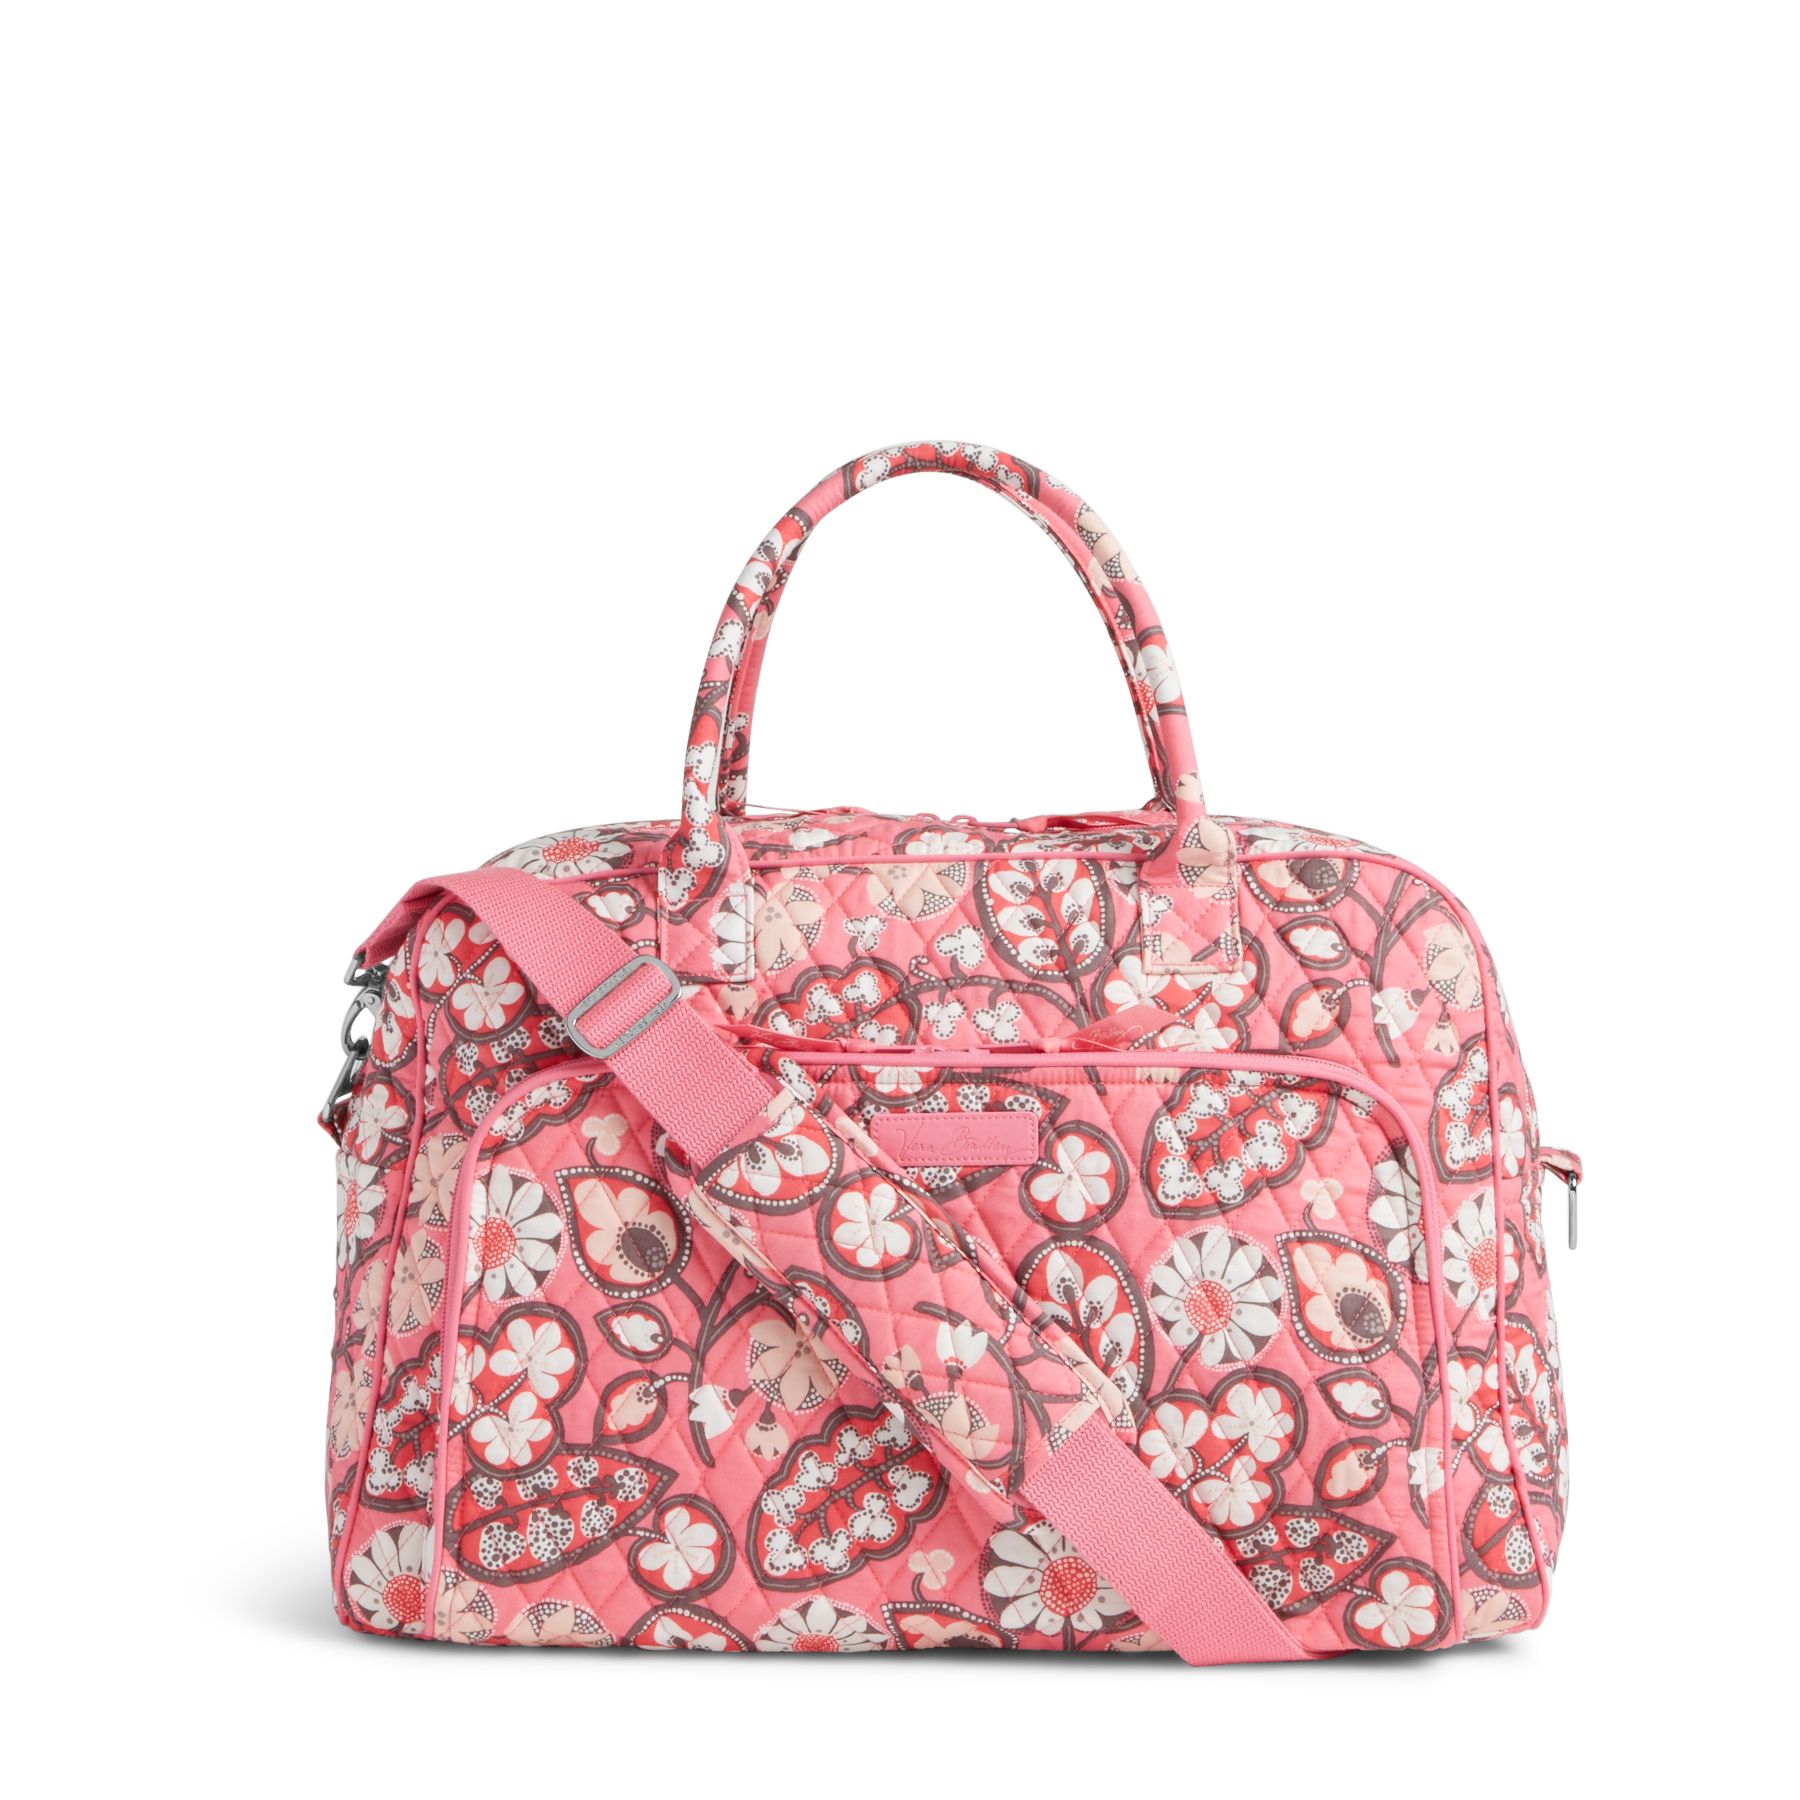 Vera bradley Coupon Code With Holiday SALE 50% OFF SELECT PATTERNS